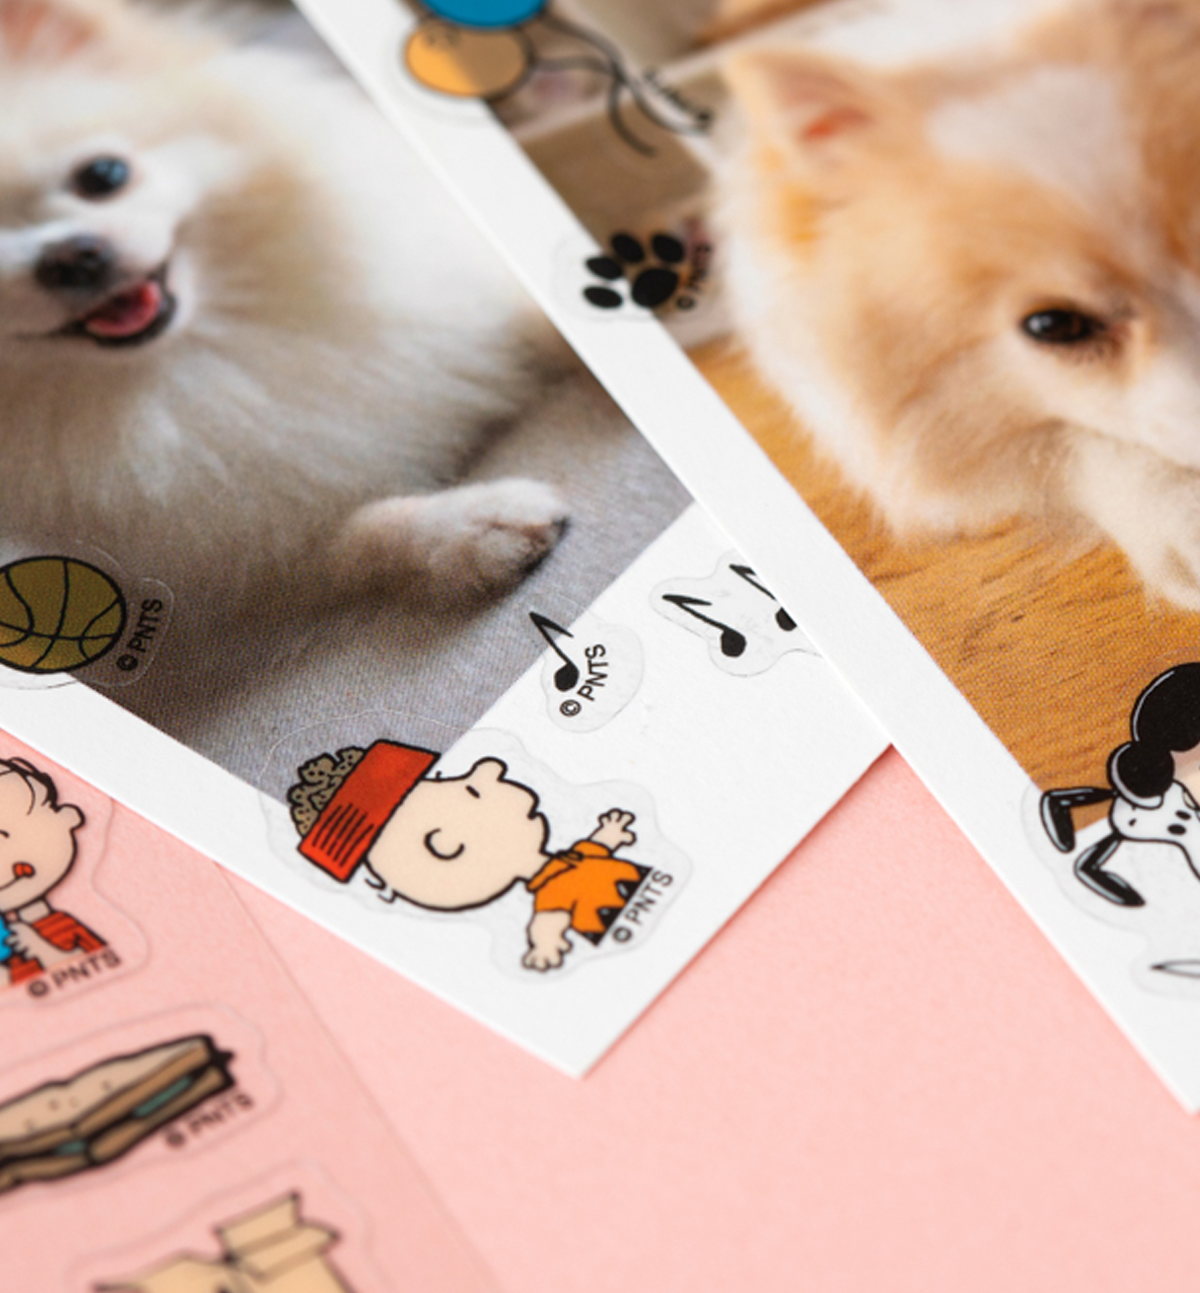 Snoopy Sticker Pack [8 Stickers]